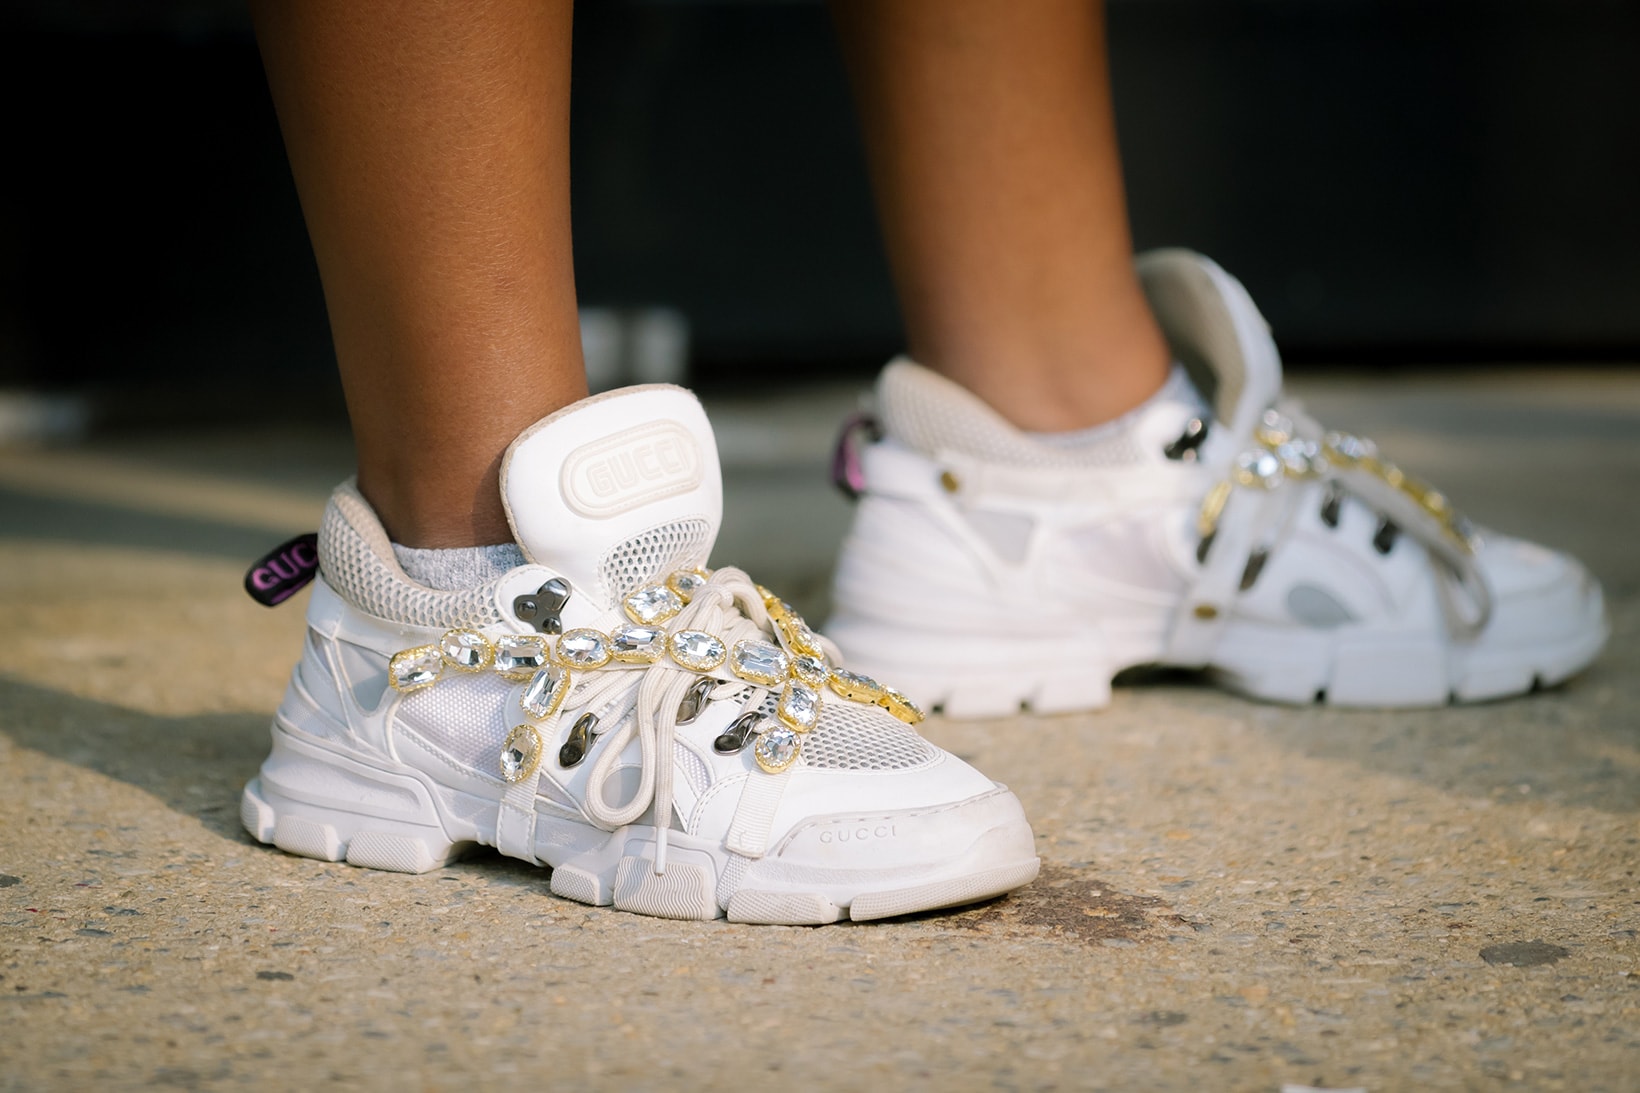 Gucci Sneakers White New York Fashion Week SS22 Best Street Style Trends Spring Summer 2022 Influencer